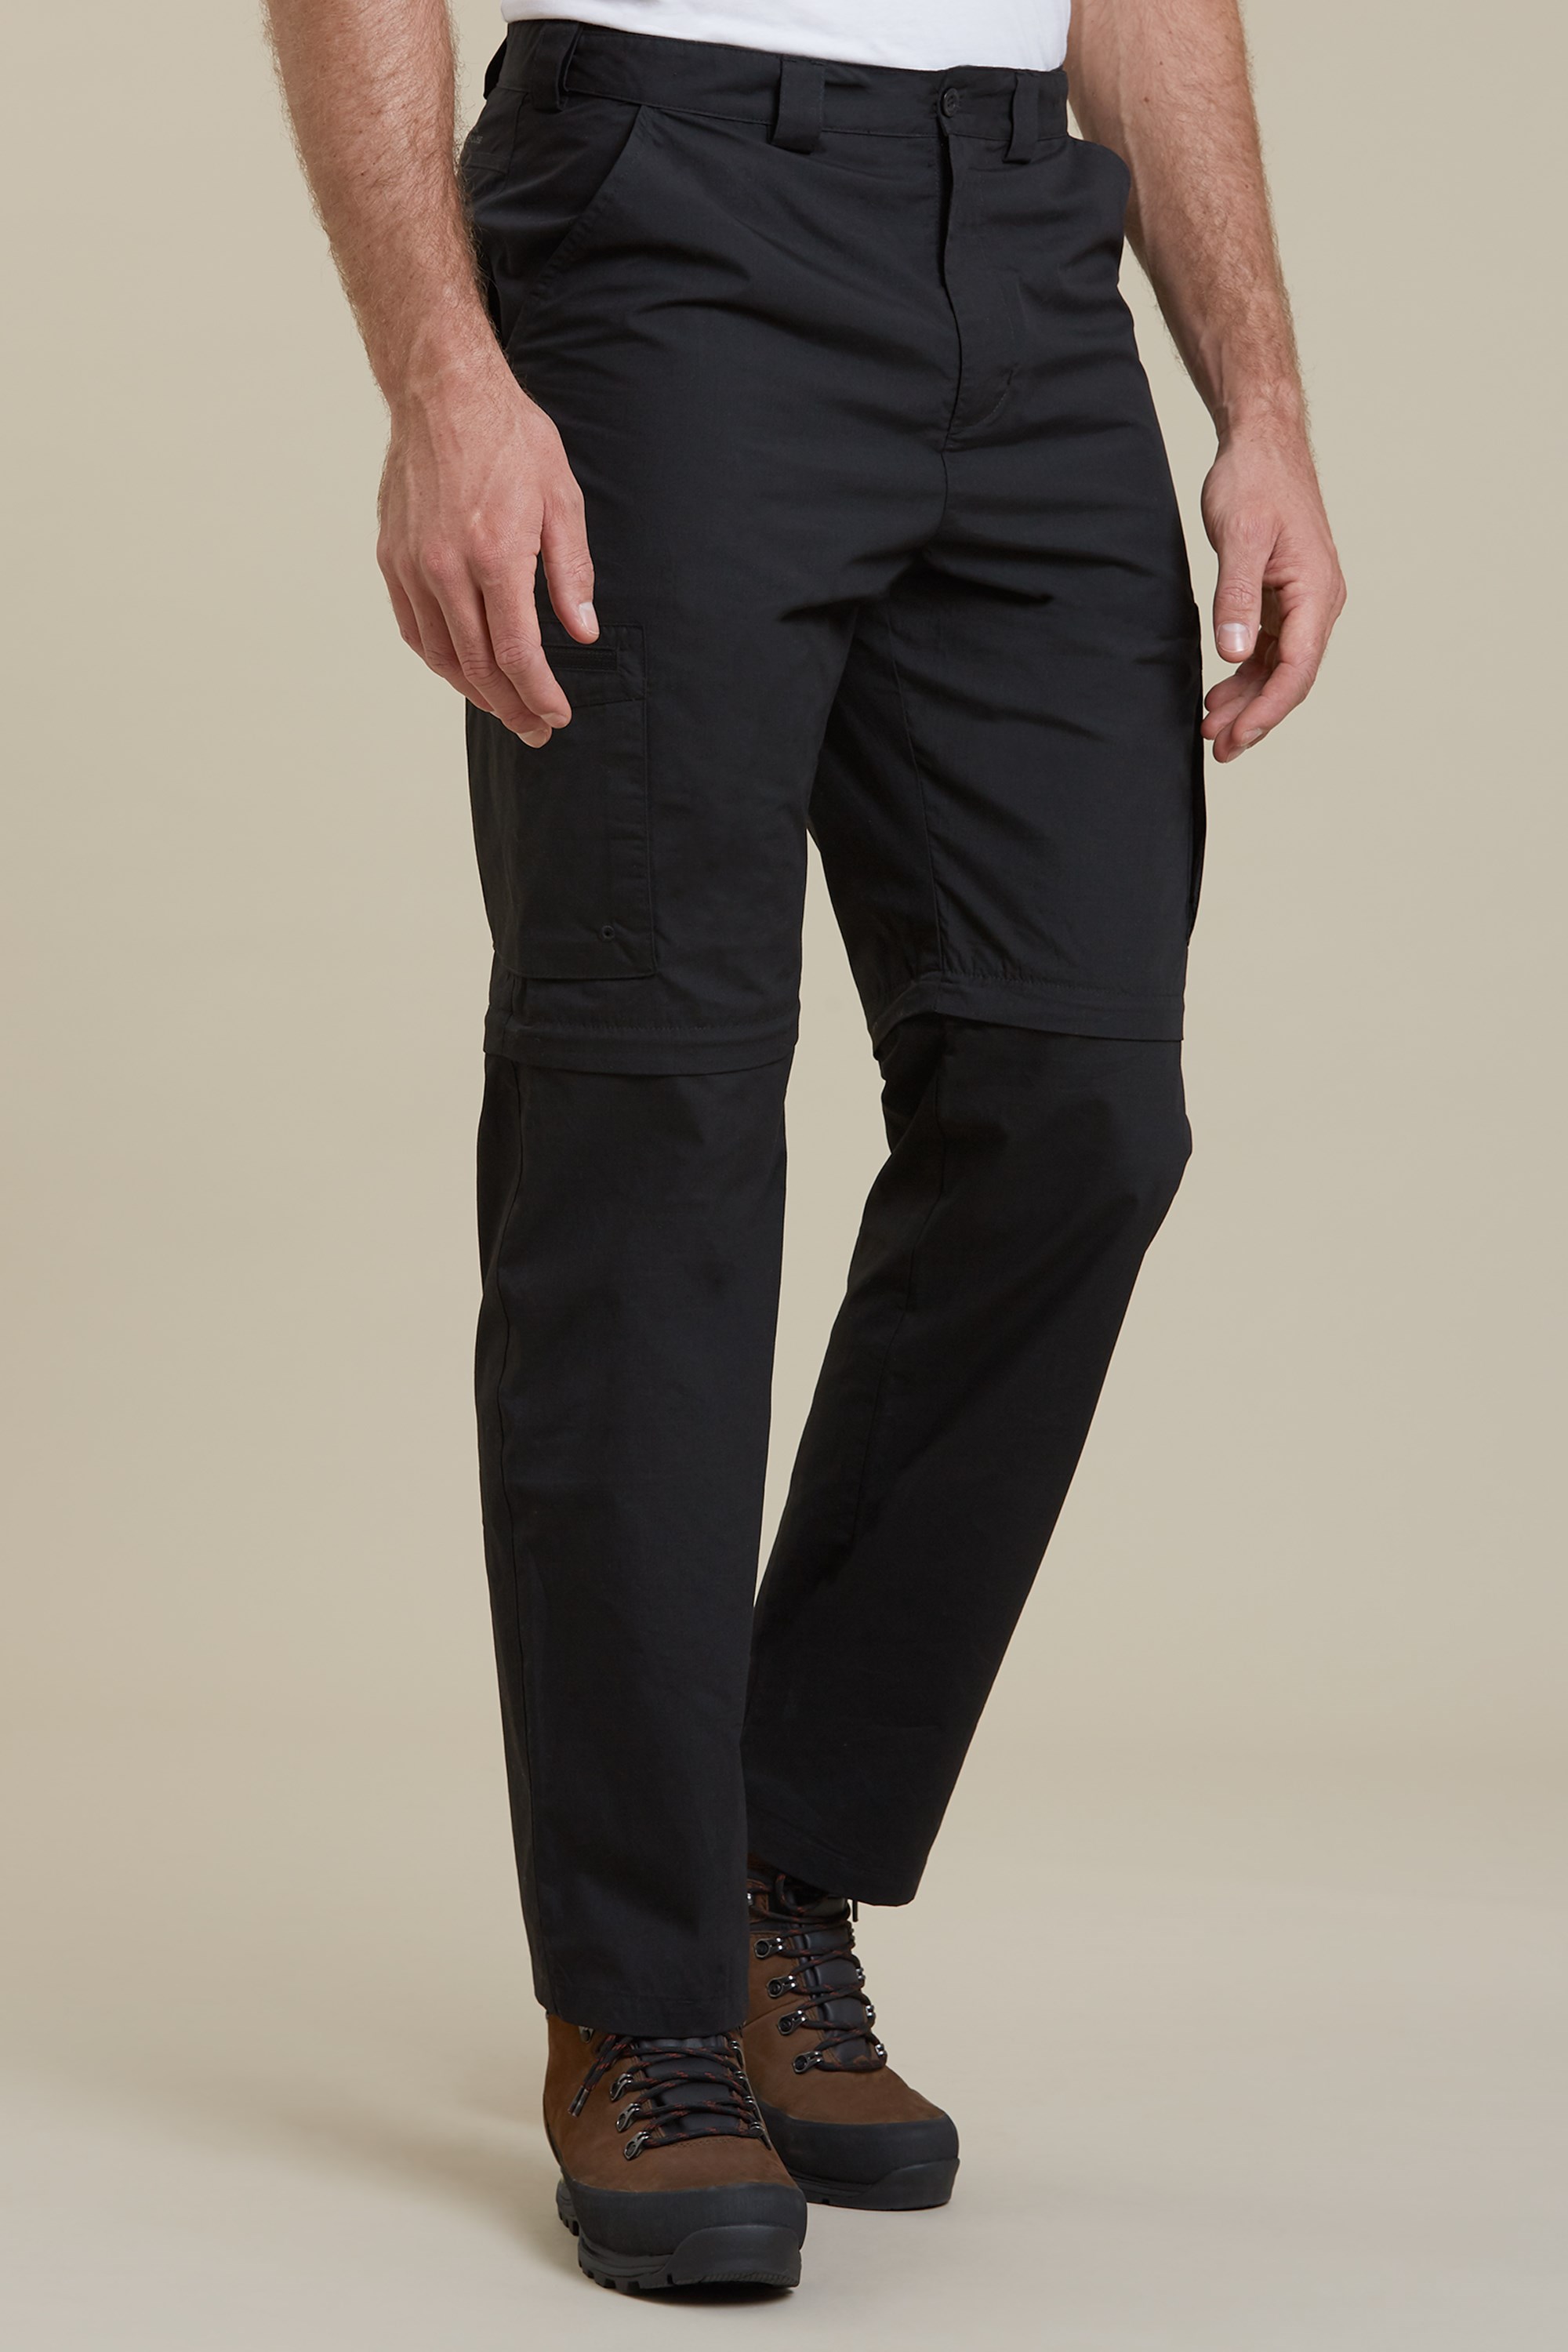 Convertible Trousers - Buy Convertible Trousers online in India